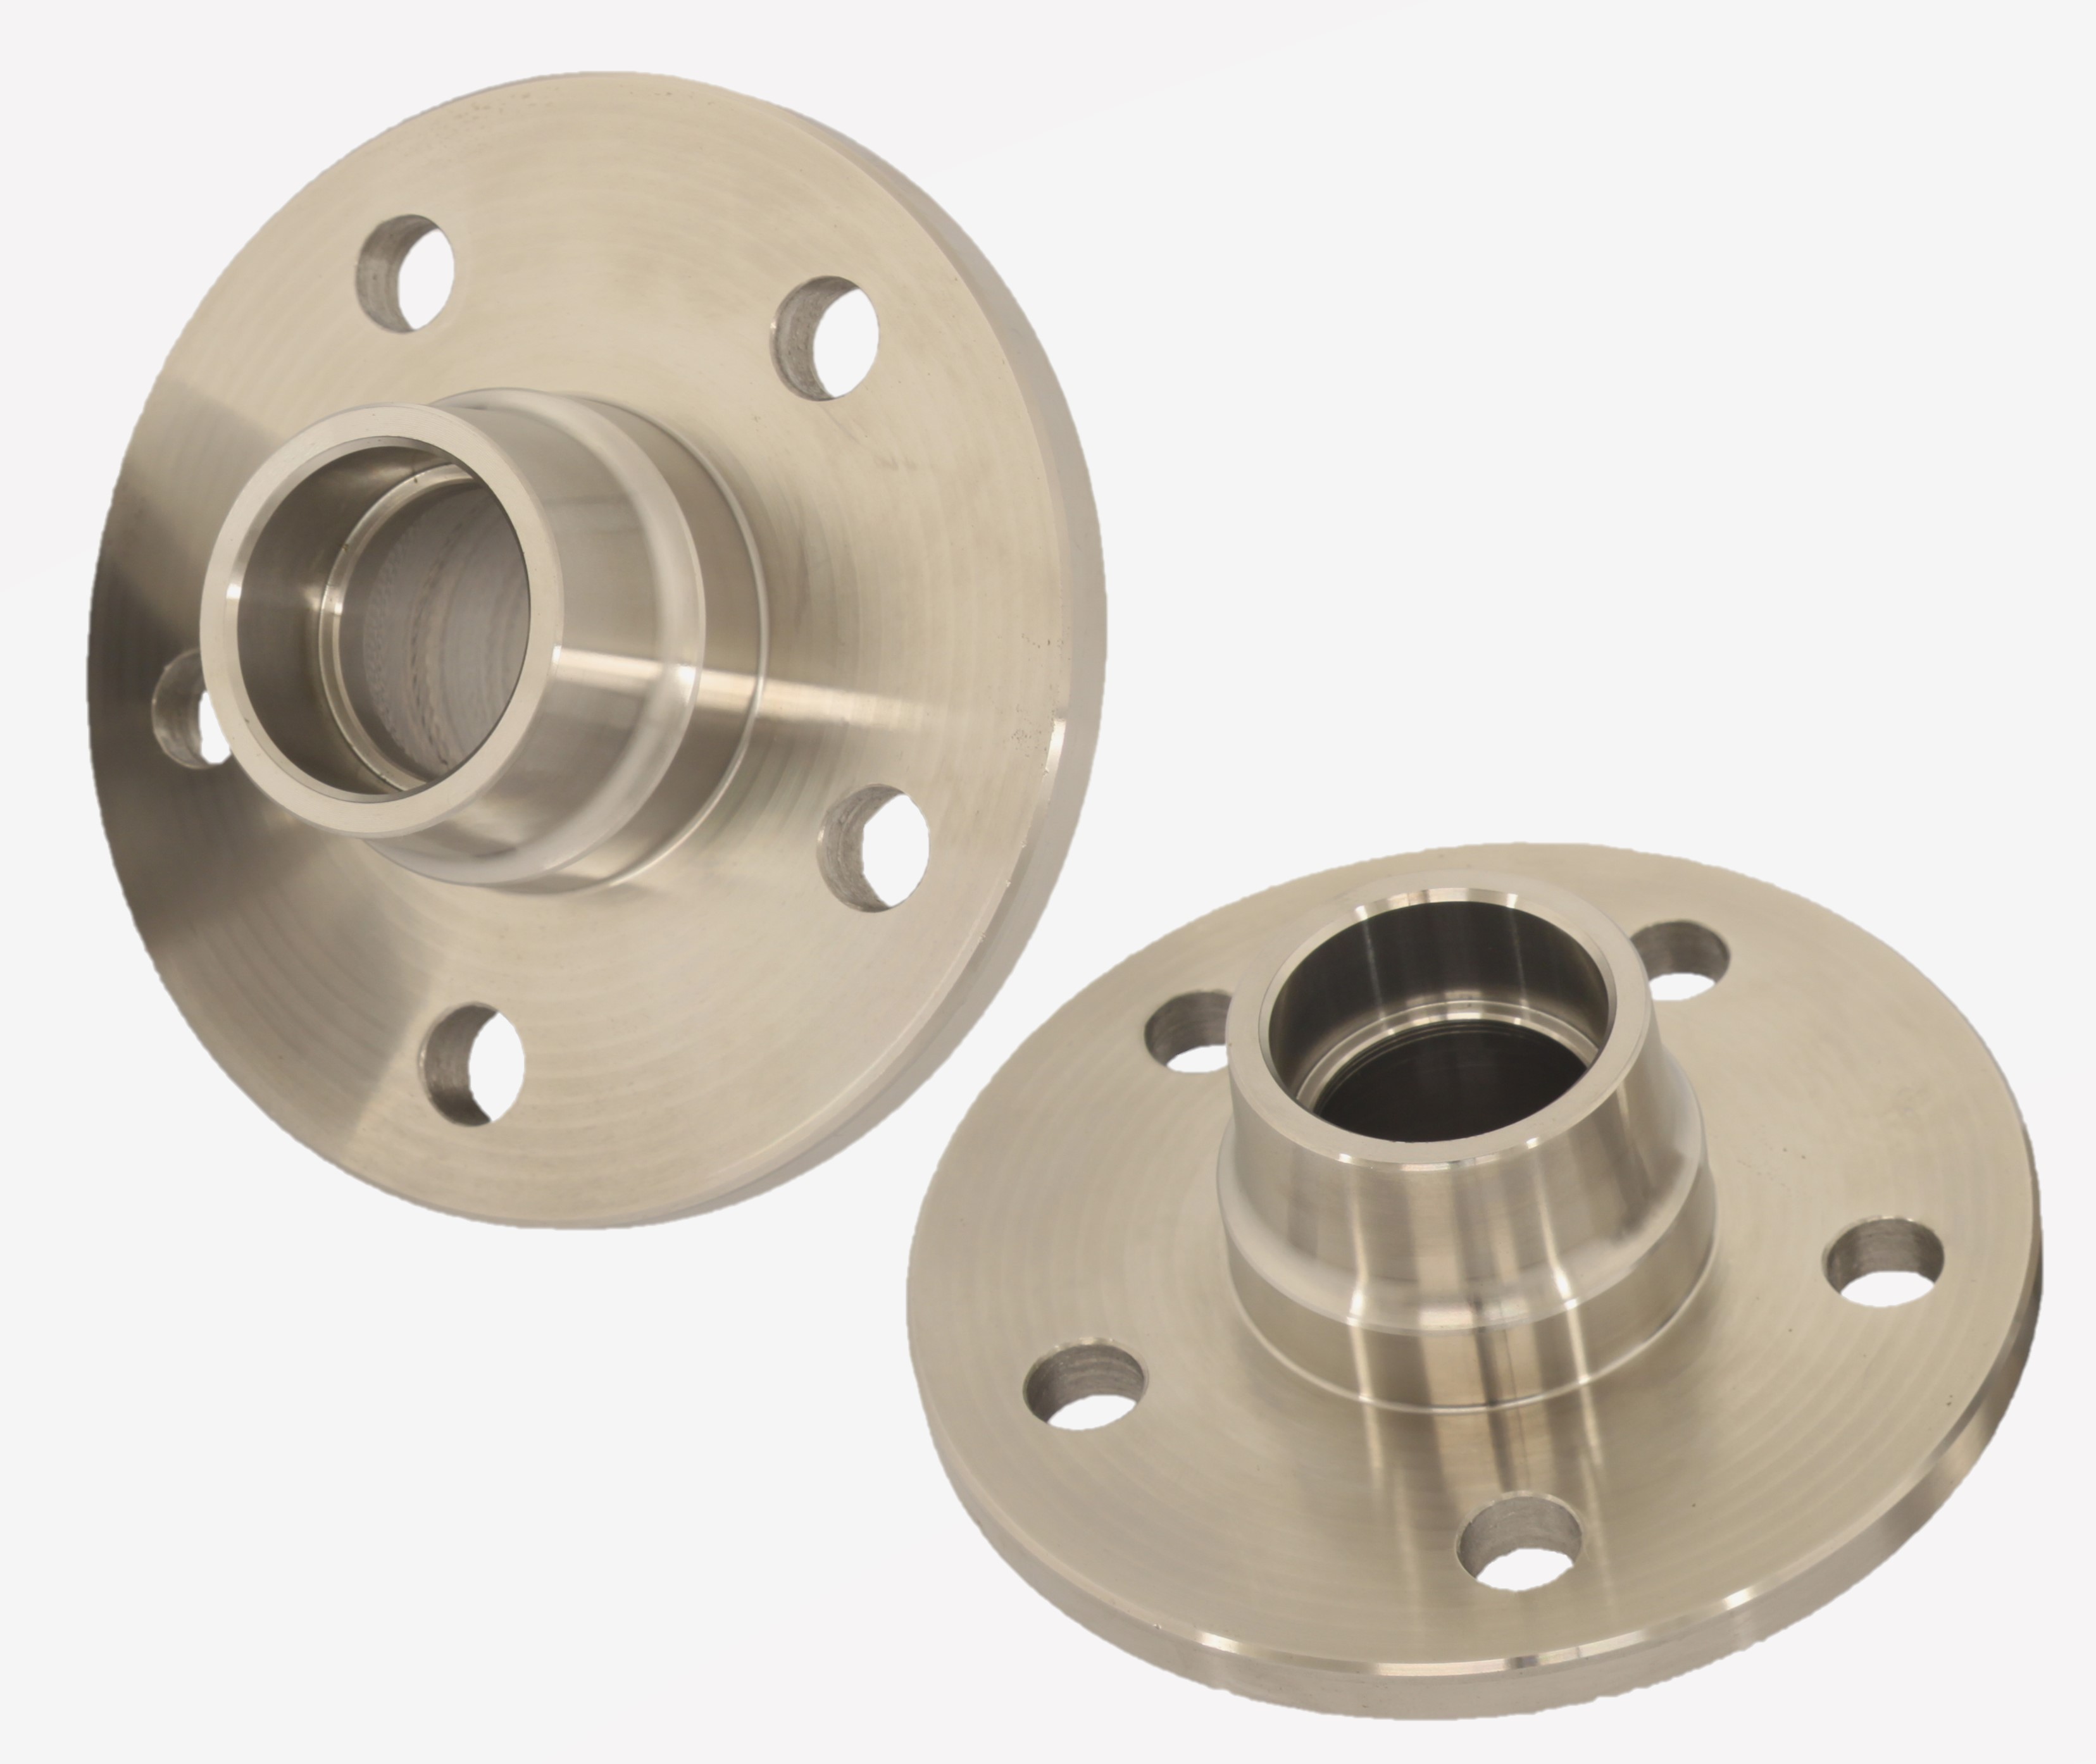 Zinc coated Billet Steel Disc Brake Hub : suit VG only (4.0" PCD with large bearings)